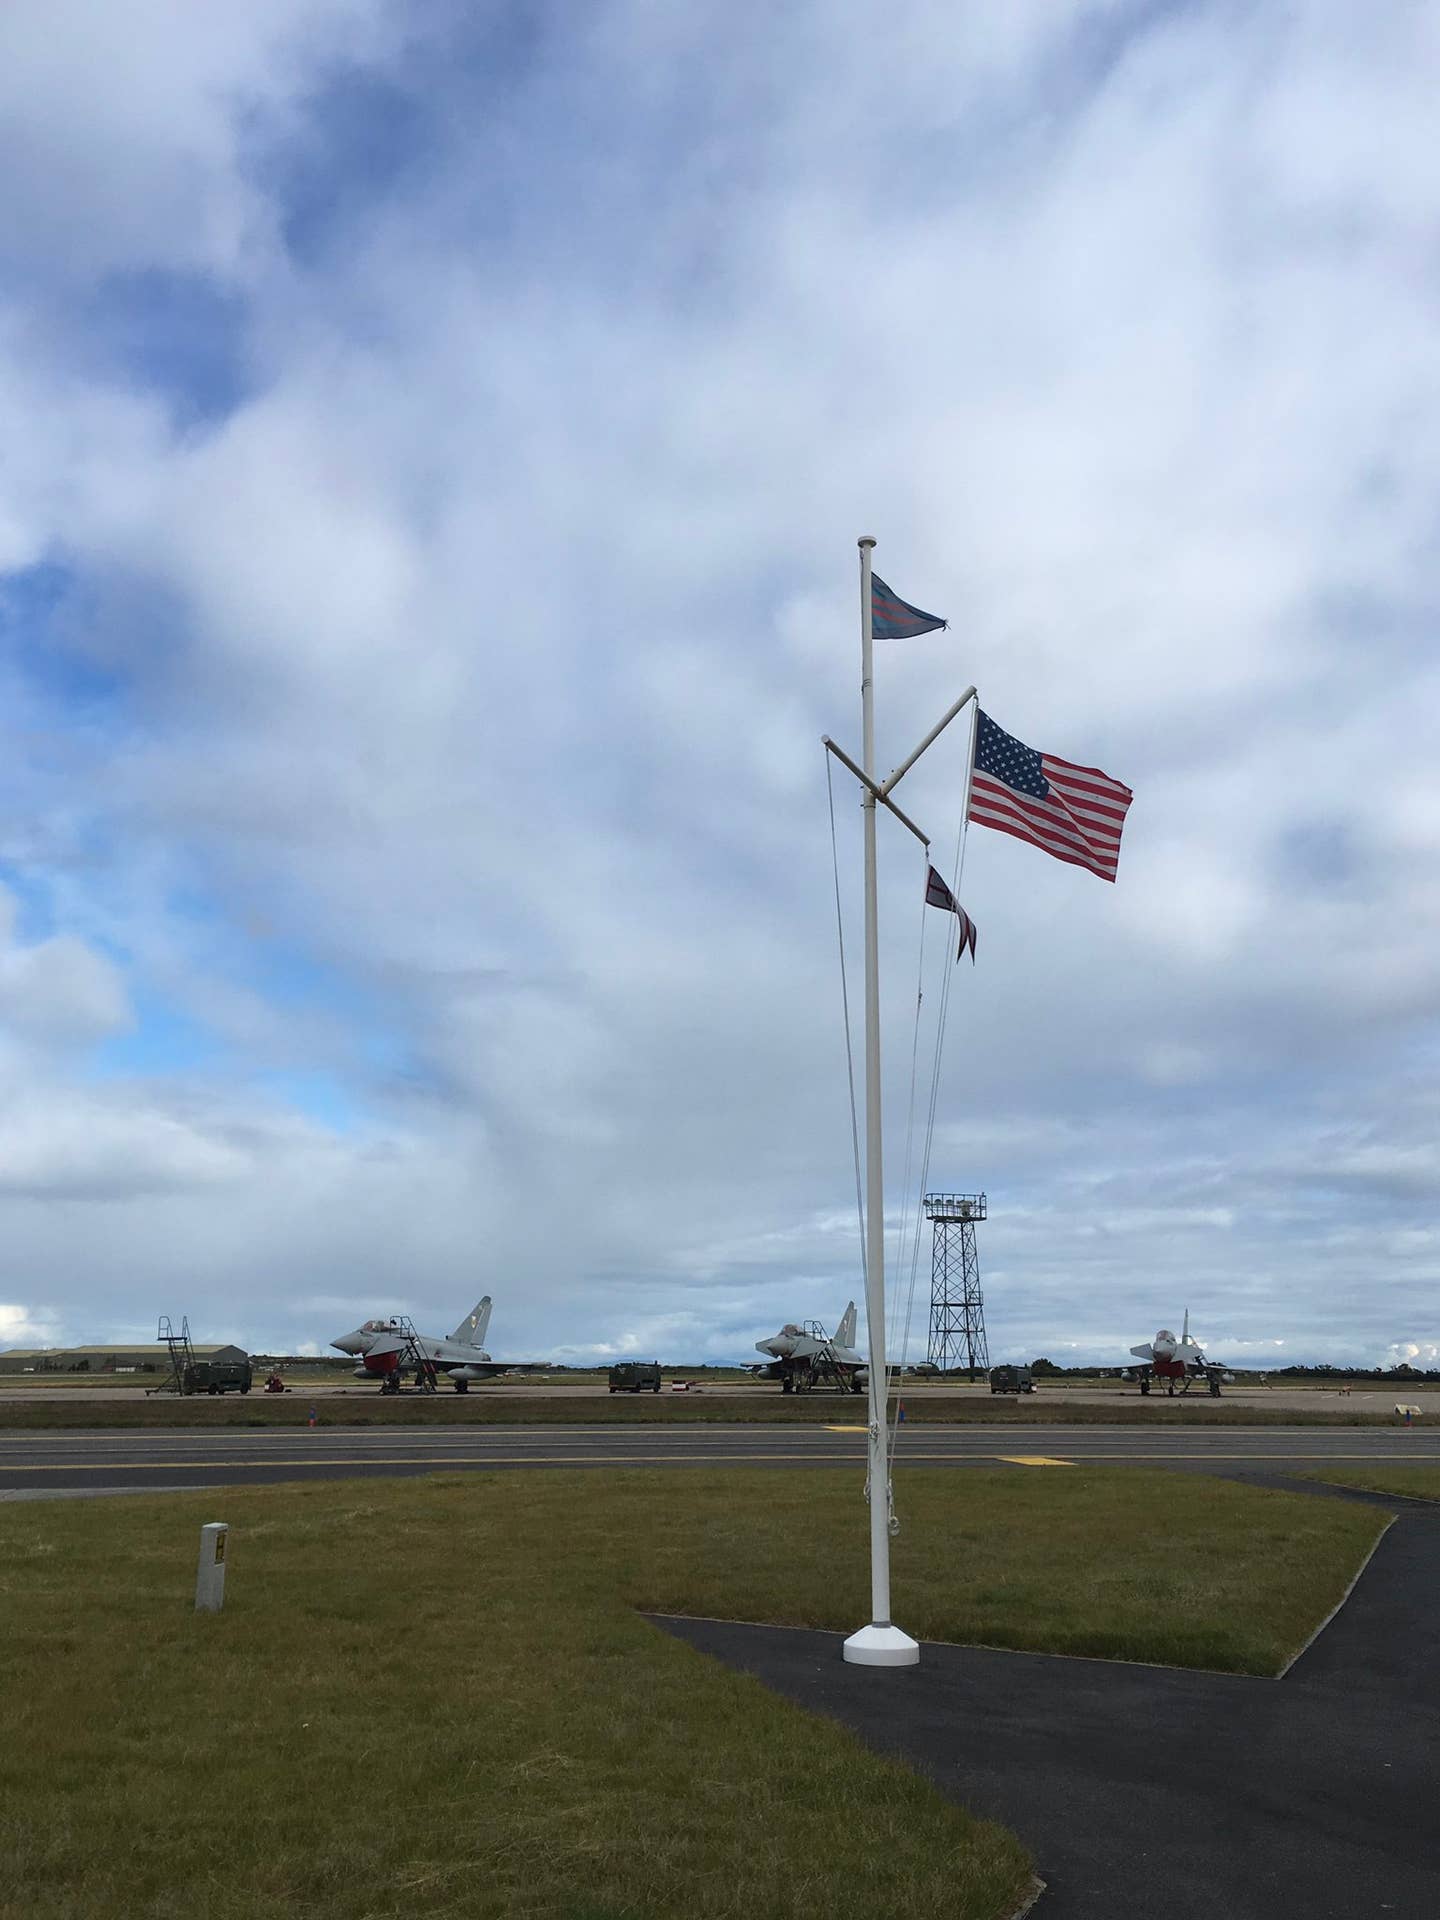 The rare sight of an American flag flying over RAF Lossiemouth airbase, on May 4, in honor of Robin Olds. According to Mike Sutton, an irate Warrant Officer quickly demanded the flag be taken down. <em>Mike Sutton</em>